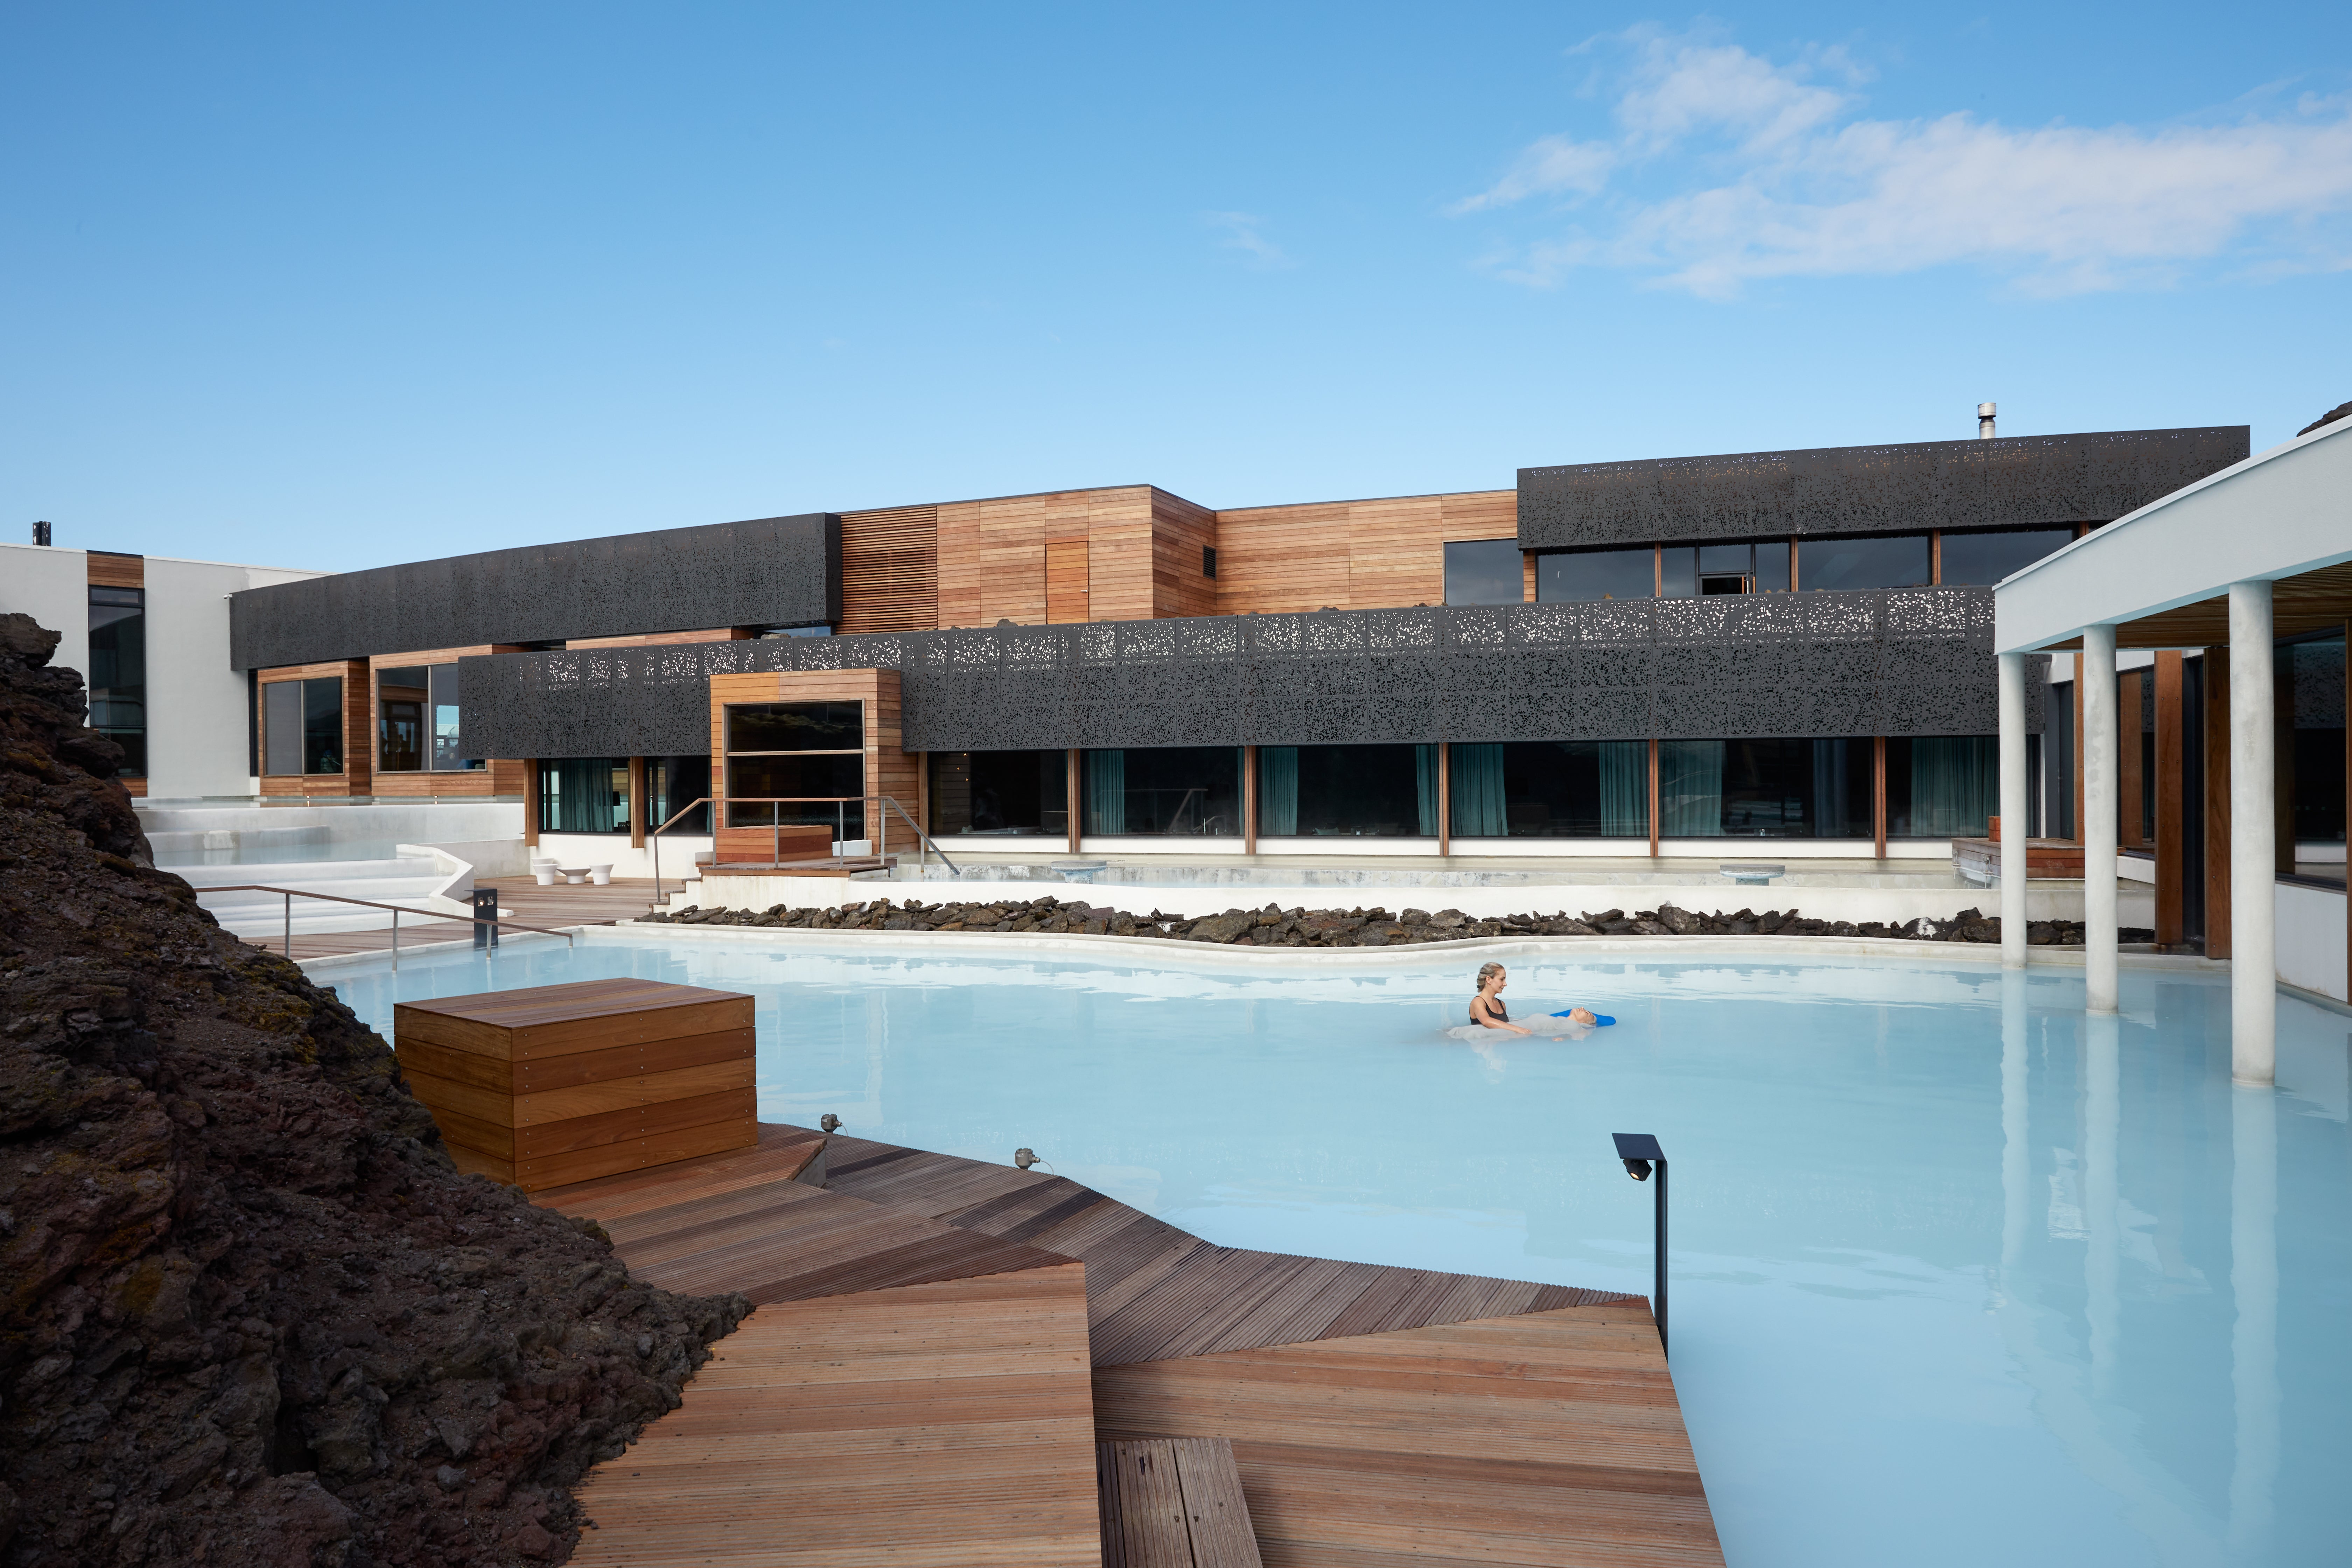 Relax in the geothermal water, away from the public eye